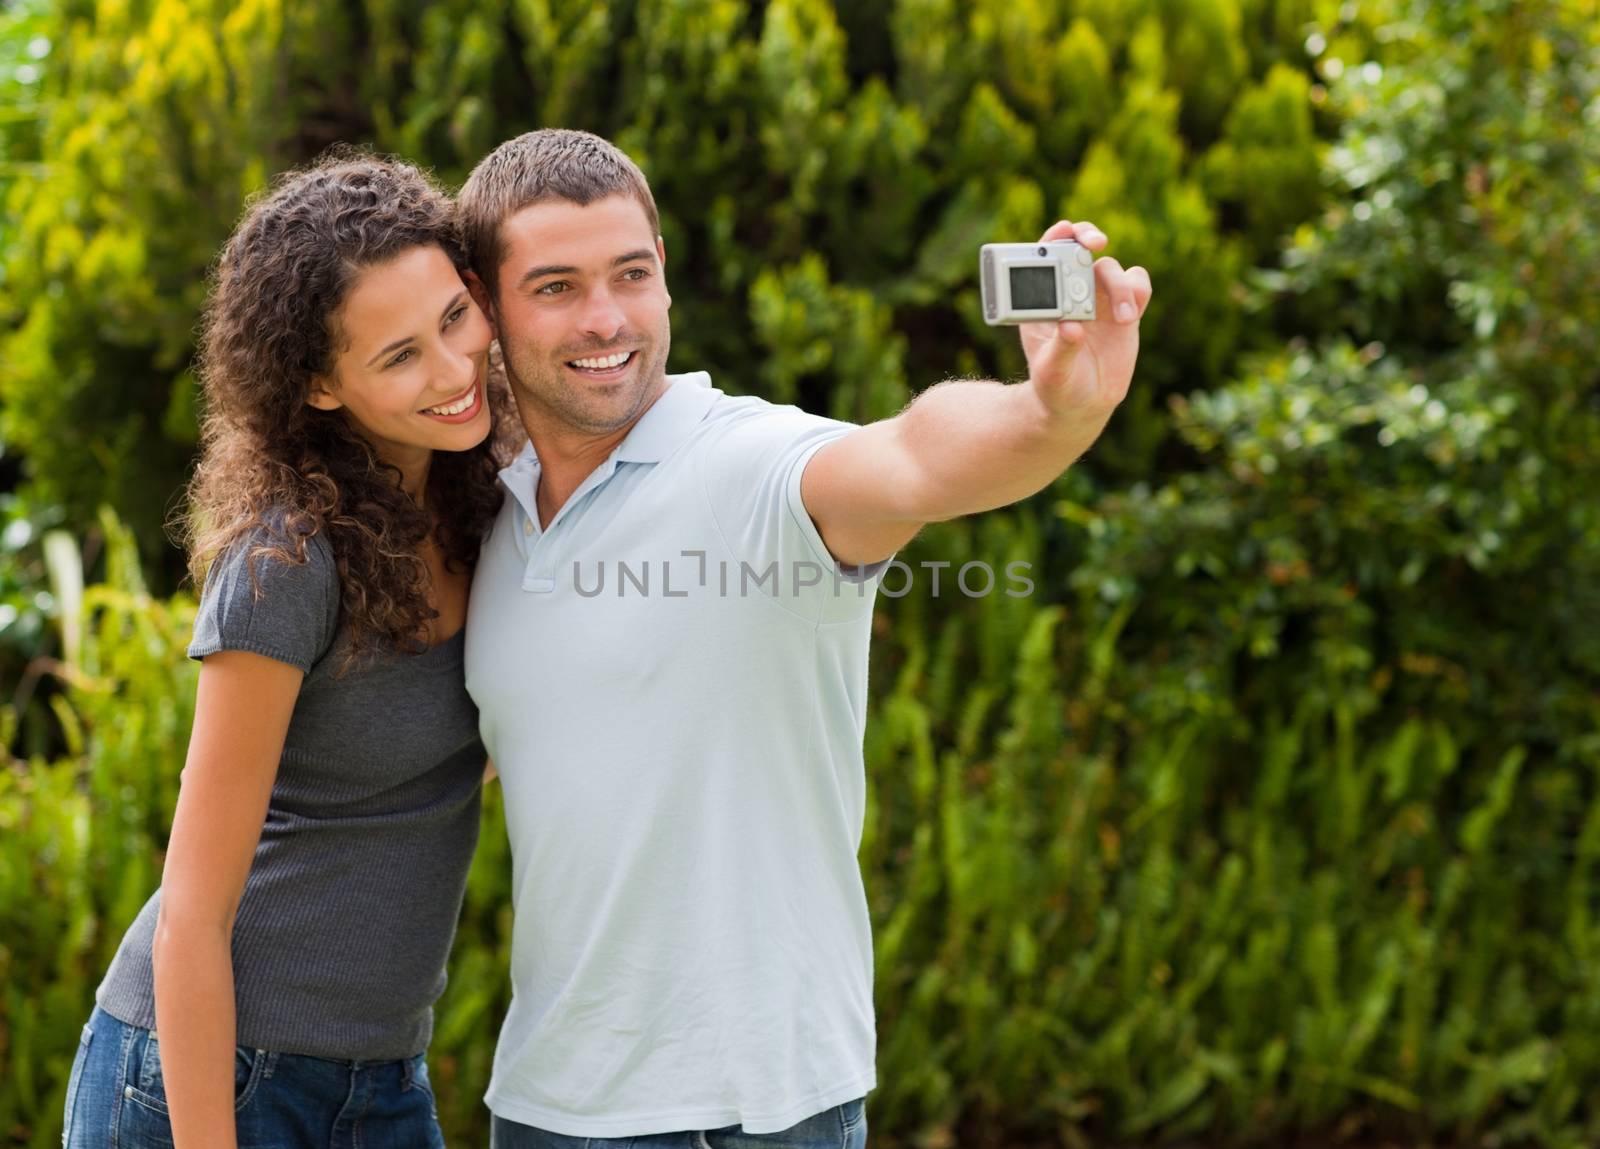 Couple taking a photo of themselves in the garden